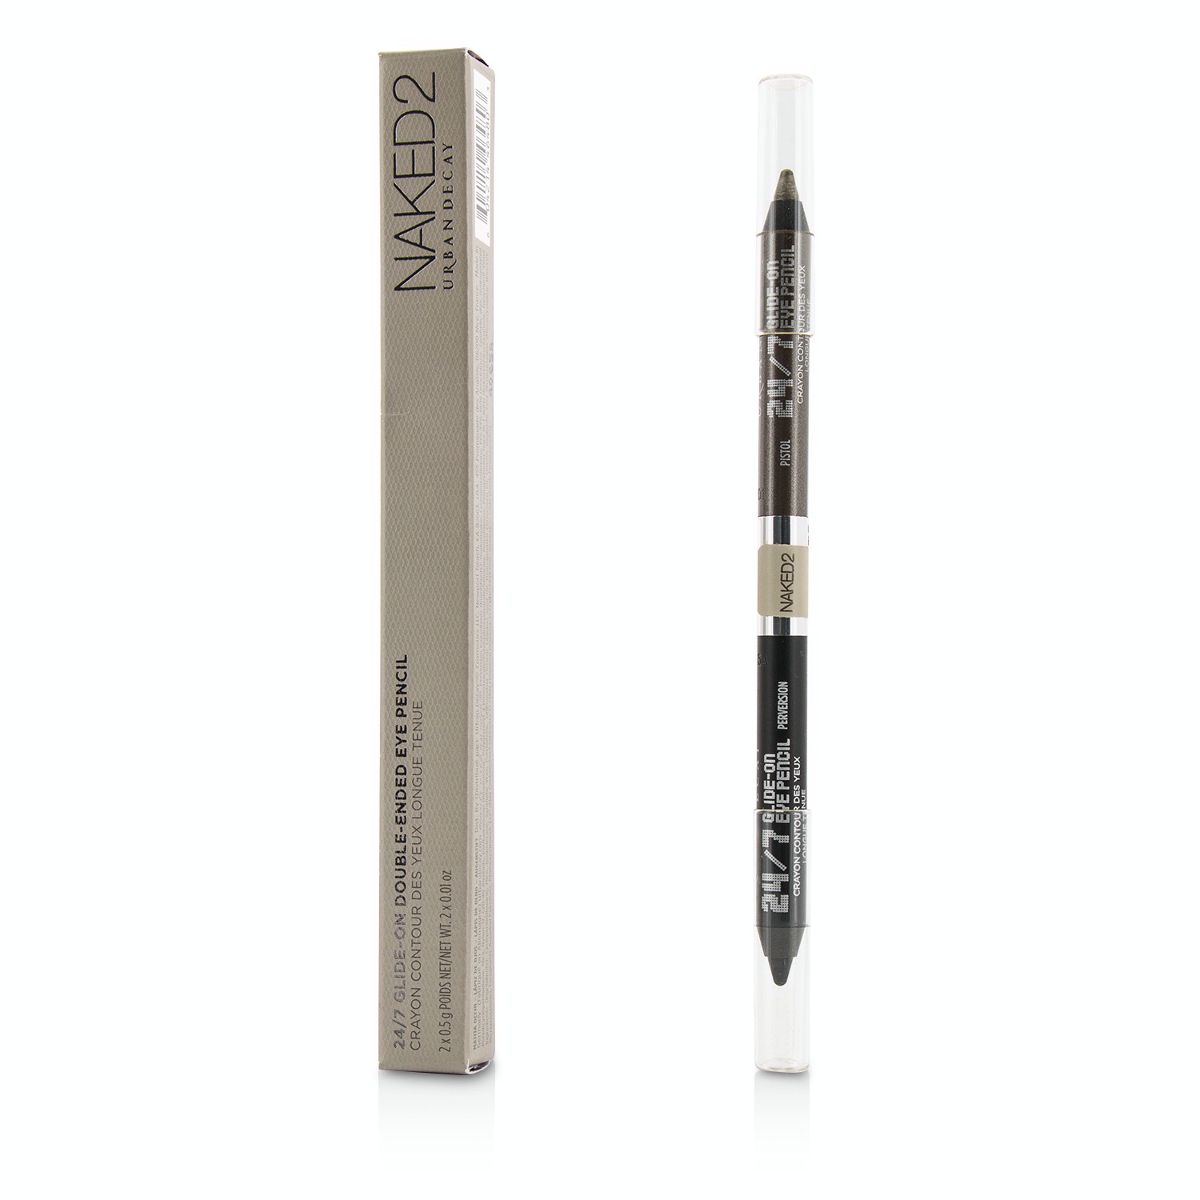 24/7 Glide On Double Ended Eye Pencil - Naked 2 (Perversion/Pistol) Urban Decay Image